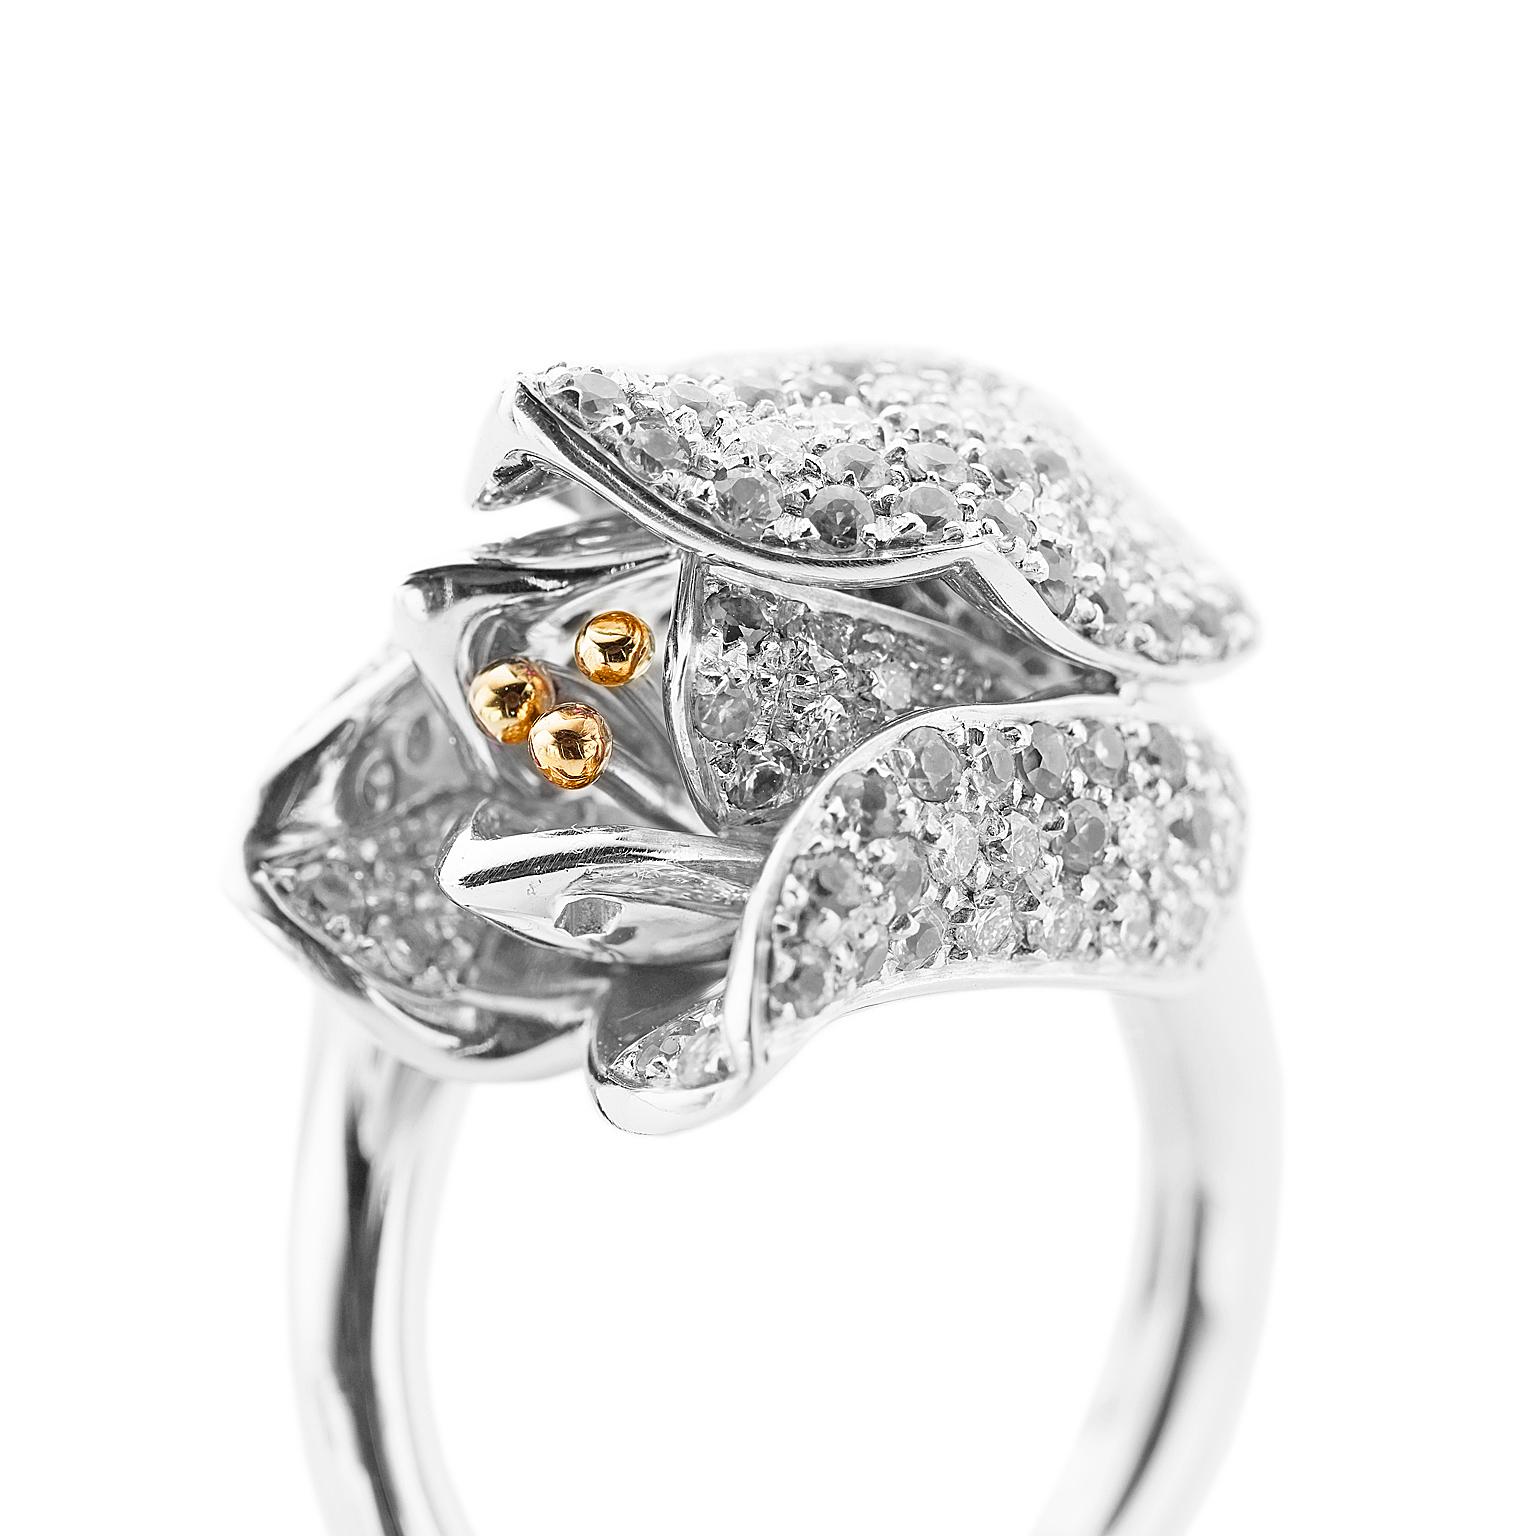 2.60 Carat White Diamond White 18 Kt Gold Flower Tulip Cocktail Ring
This ring is inspired by the world of flowers, it's a white tulip with many white diamonds, in total ct 2,60 quality F/G VVS. It has three pistils all of them in red gold. 

The